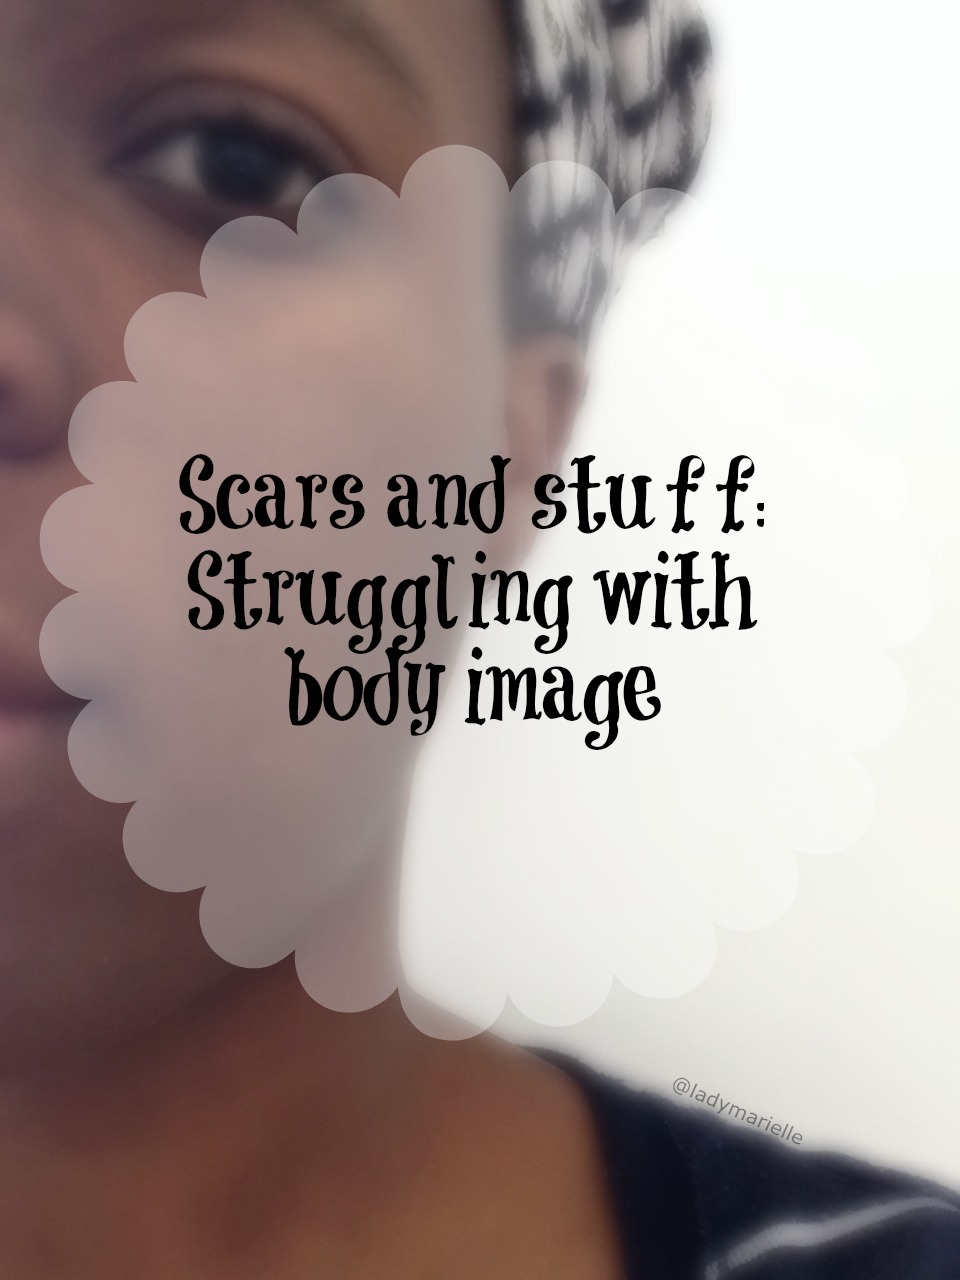 Scars and stuff: Struggling with body image